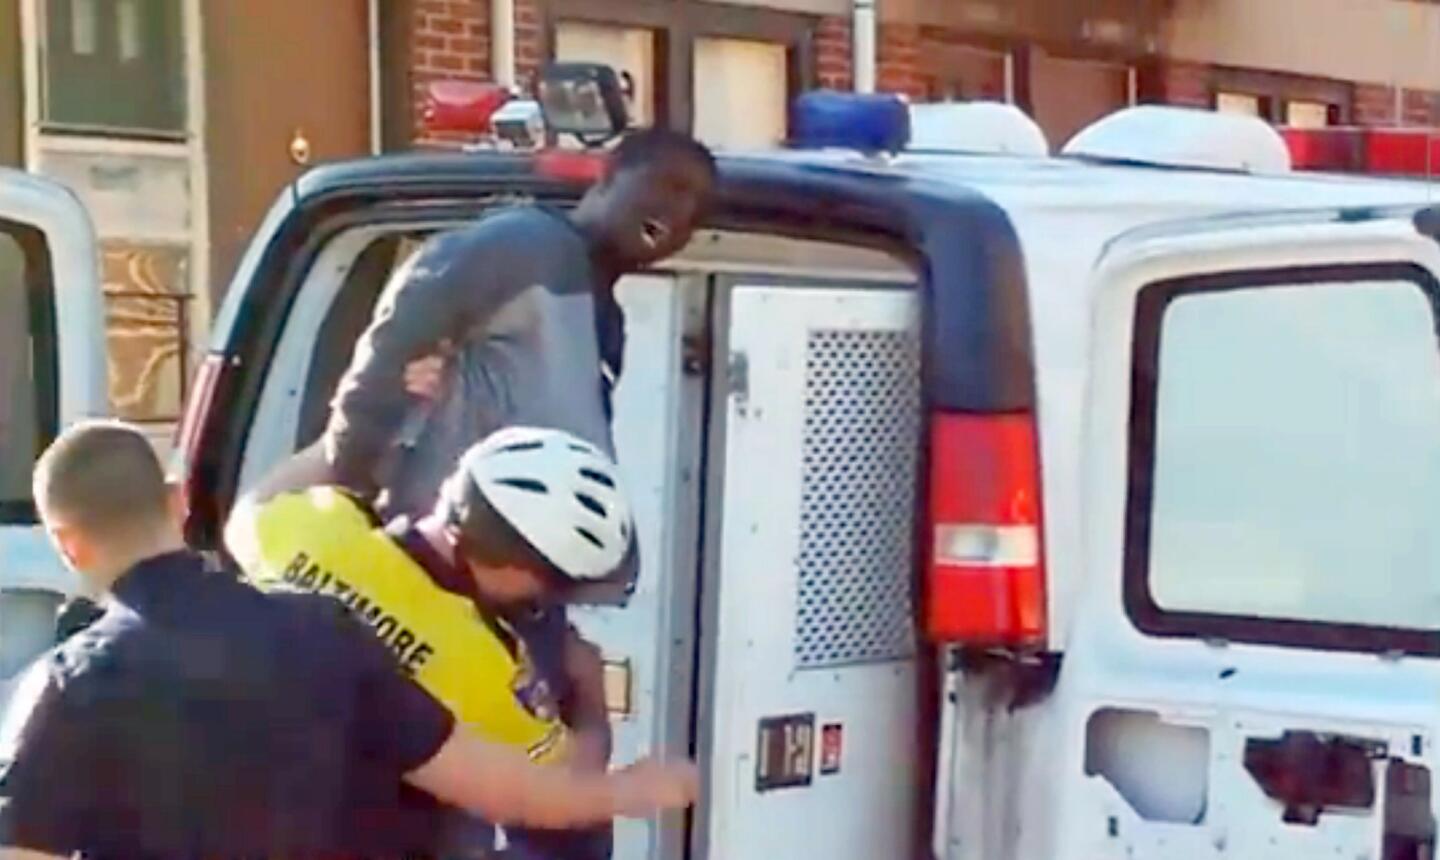 Frame grab from Kevin Moore's April 12, 2015, cellphone video of Freddie Gray being loaded into a Baltimore police van during his arrest. At some point during his time in custody, Gray, 25, fell into a coma and died April 19 from injuries to his spinal cord sustained that day. A task force was created by Baltimore Police to investigate Gray's arrest and his death.